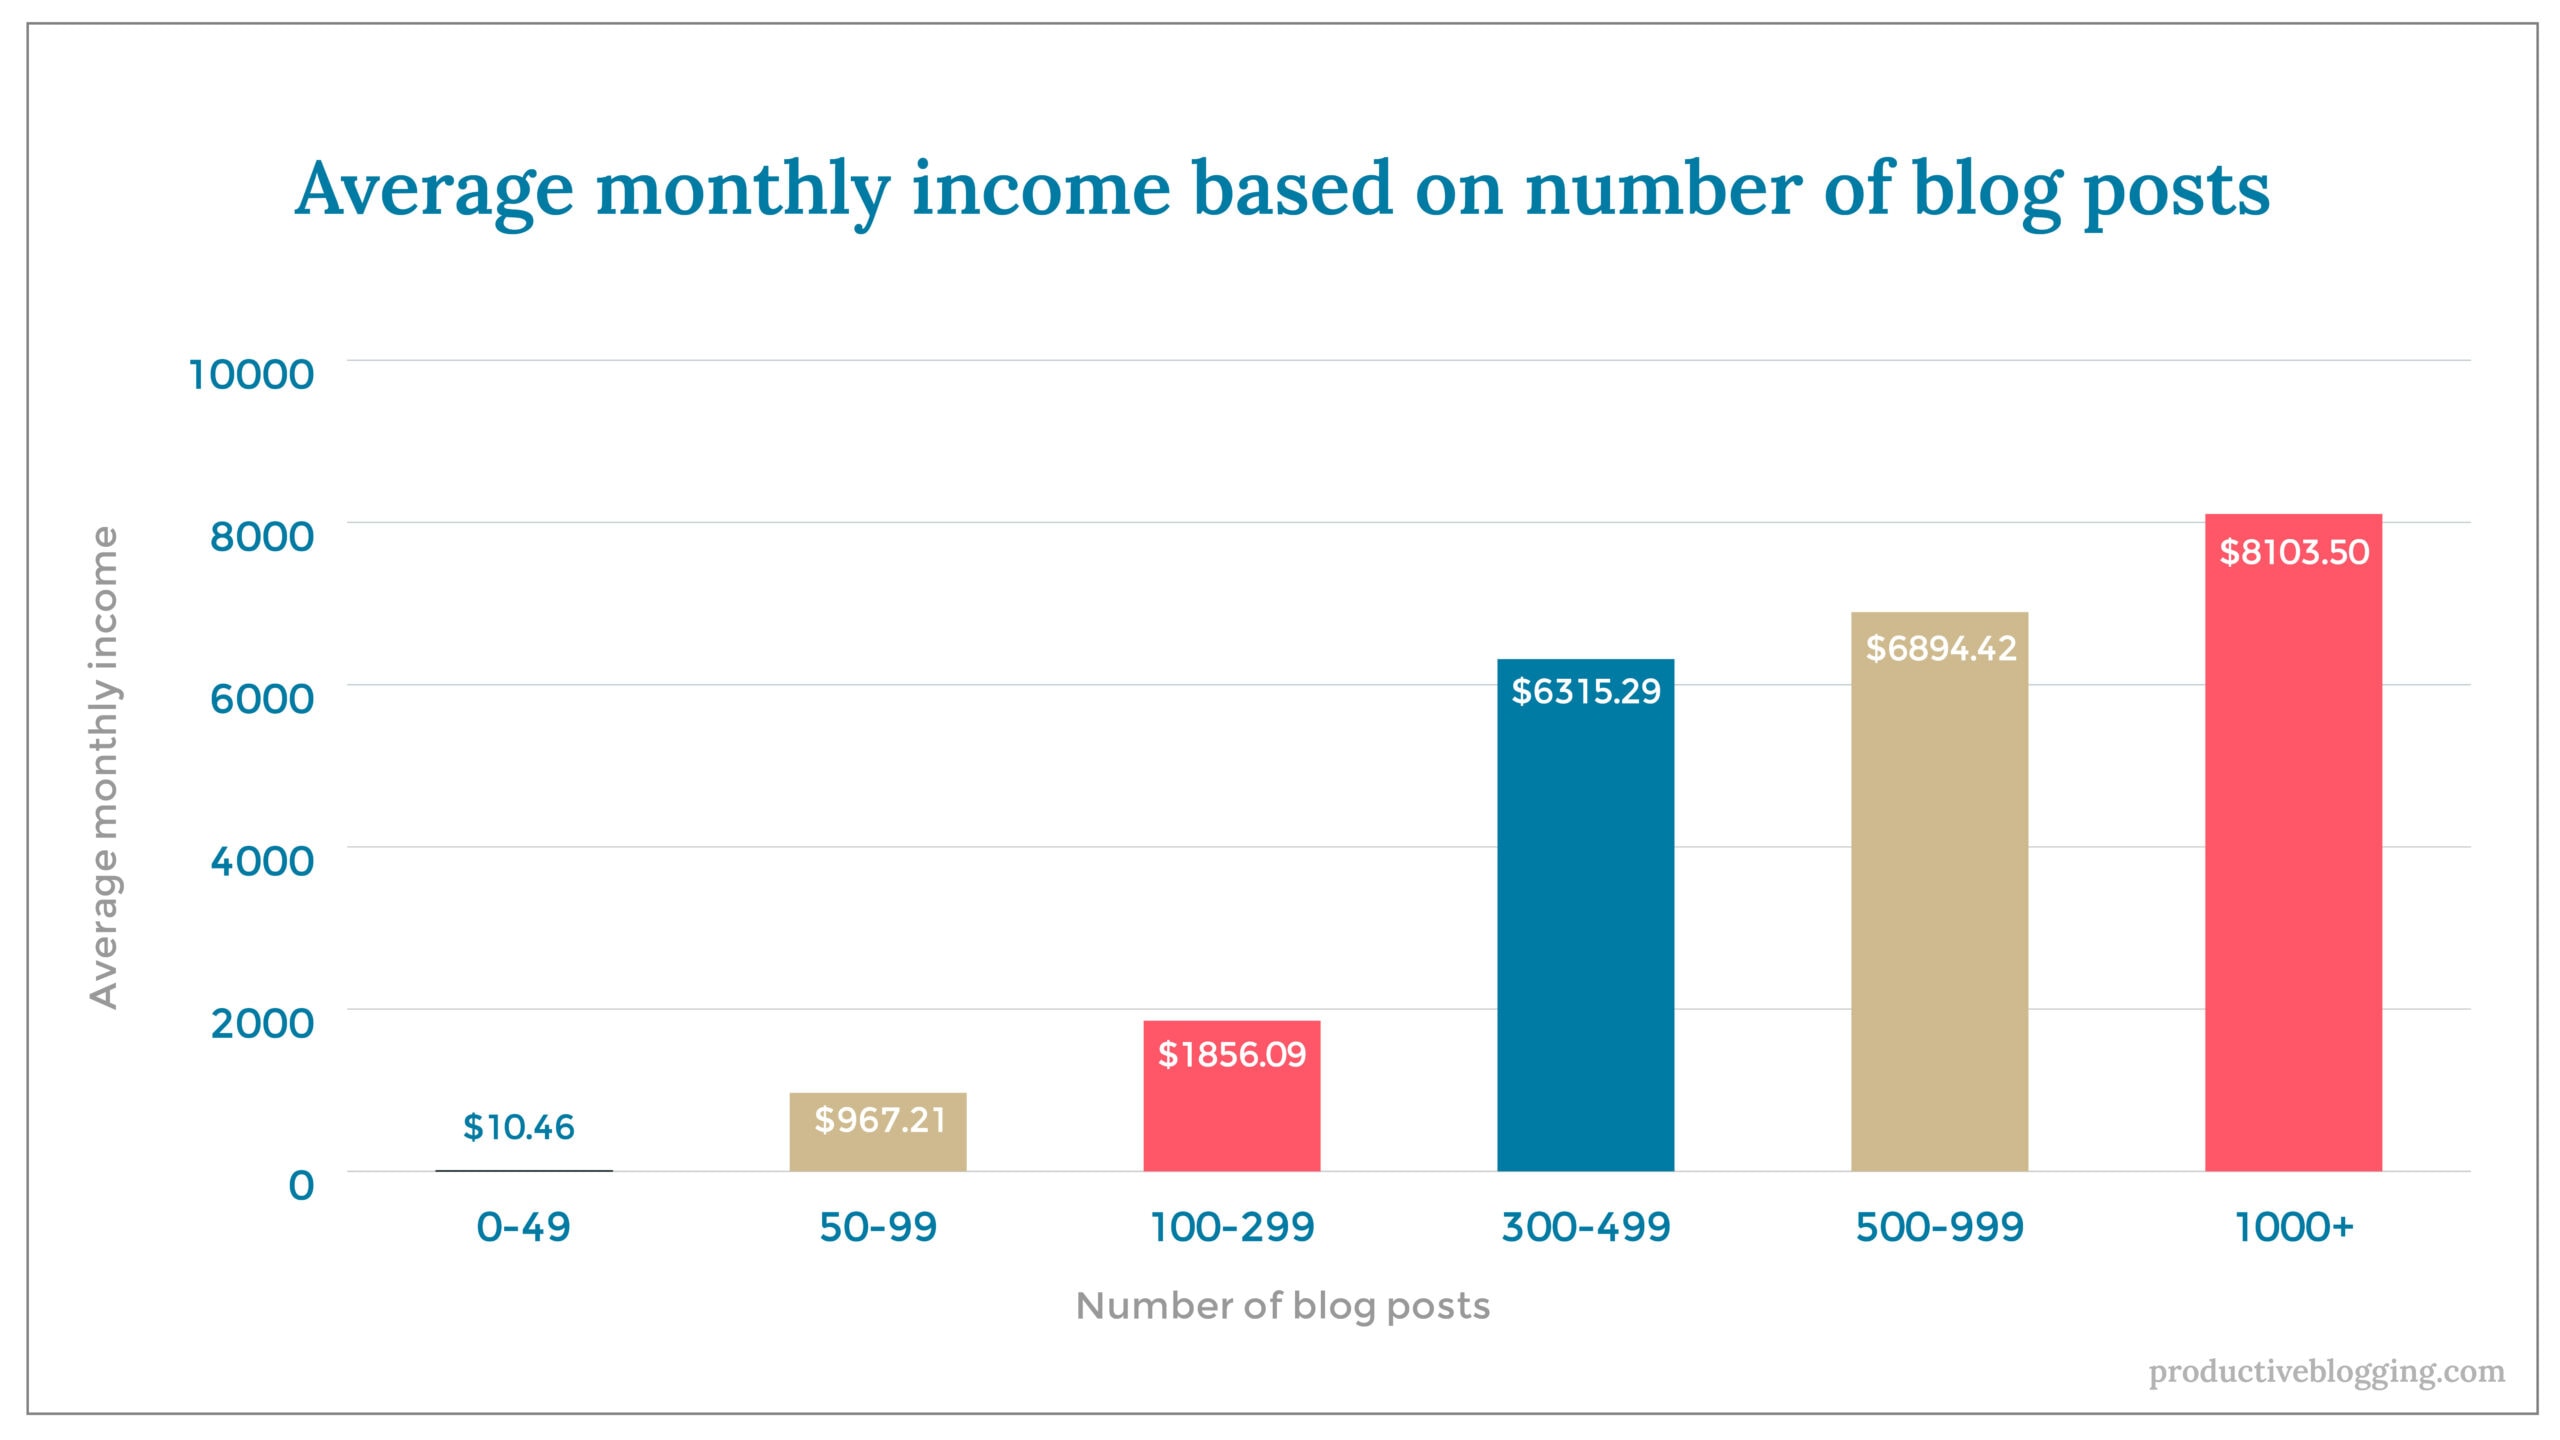 Average monthly income based on number of blog postsX axis: Number of blog postsY axis: Average monthly income0-49 		$10.4650-99		$967.21100-299	$1856.09300-499	$6315.29500-999	$6894.421000+		$8103.50